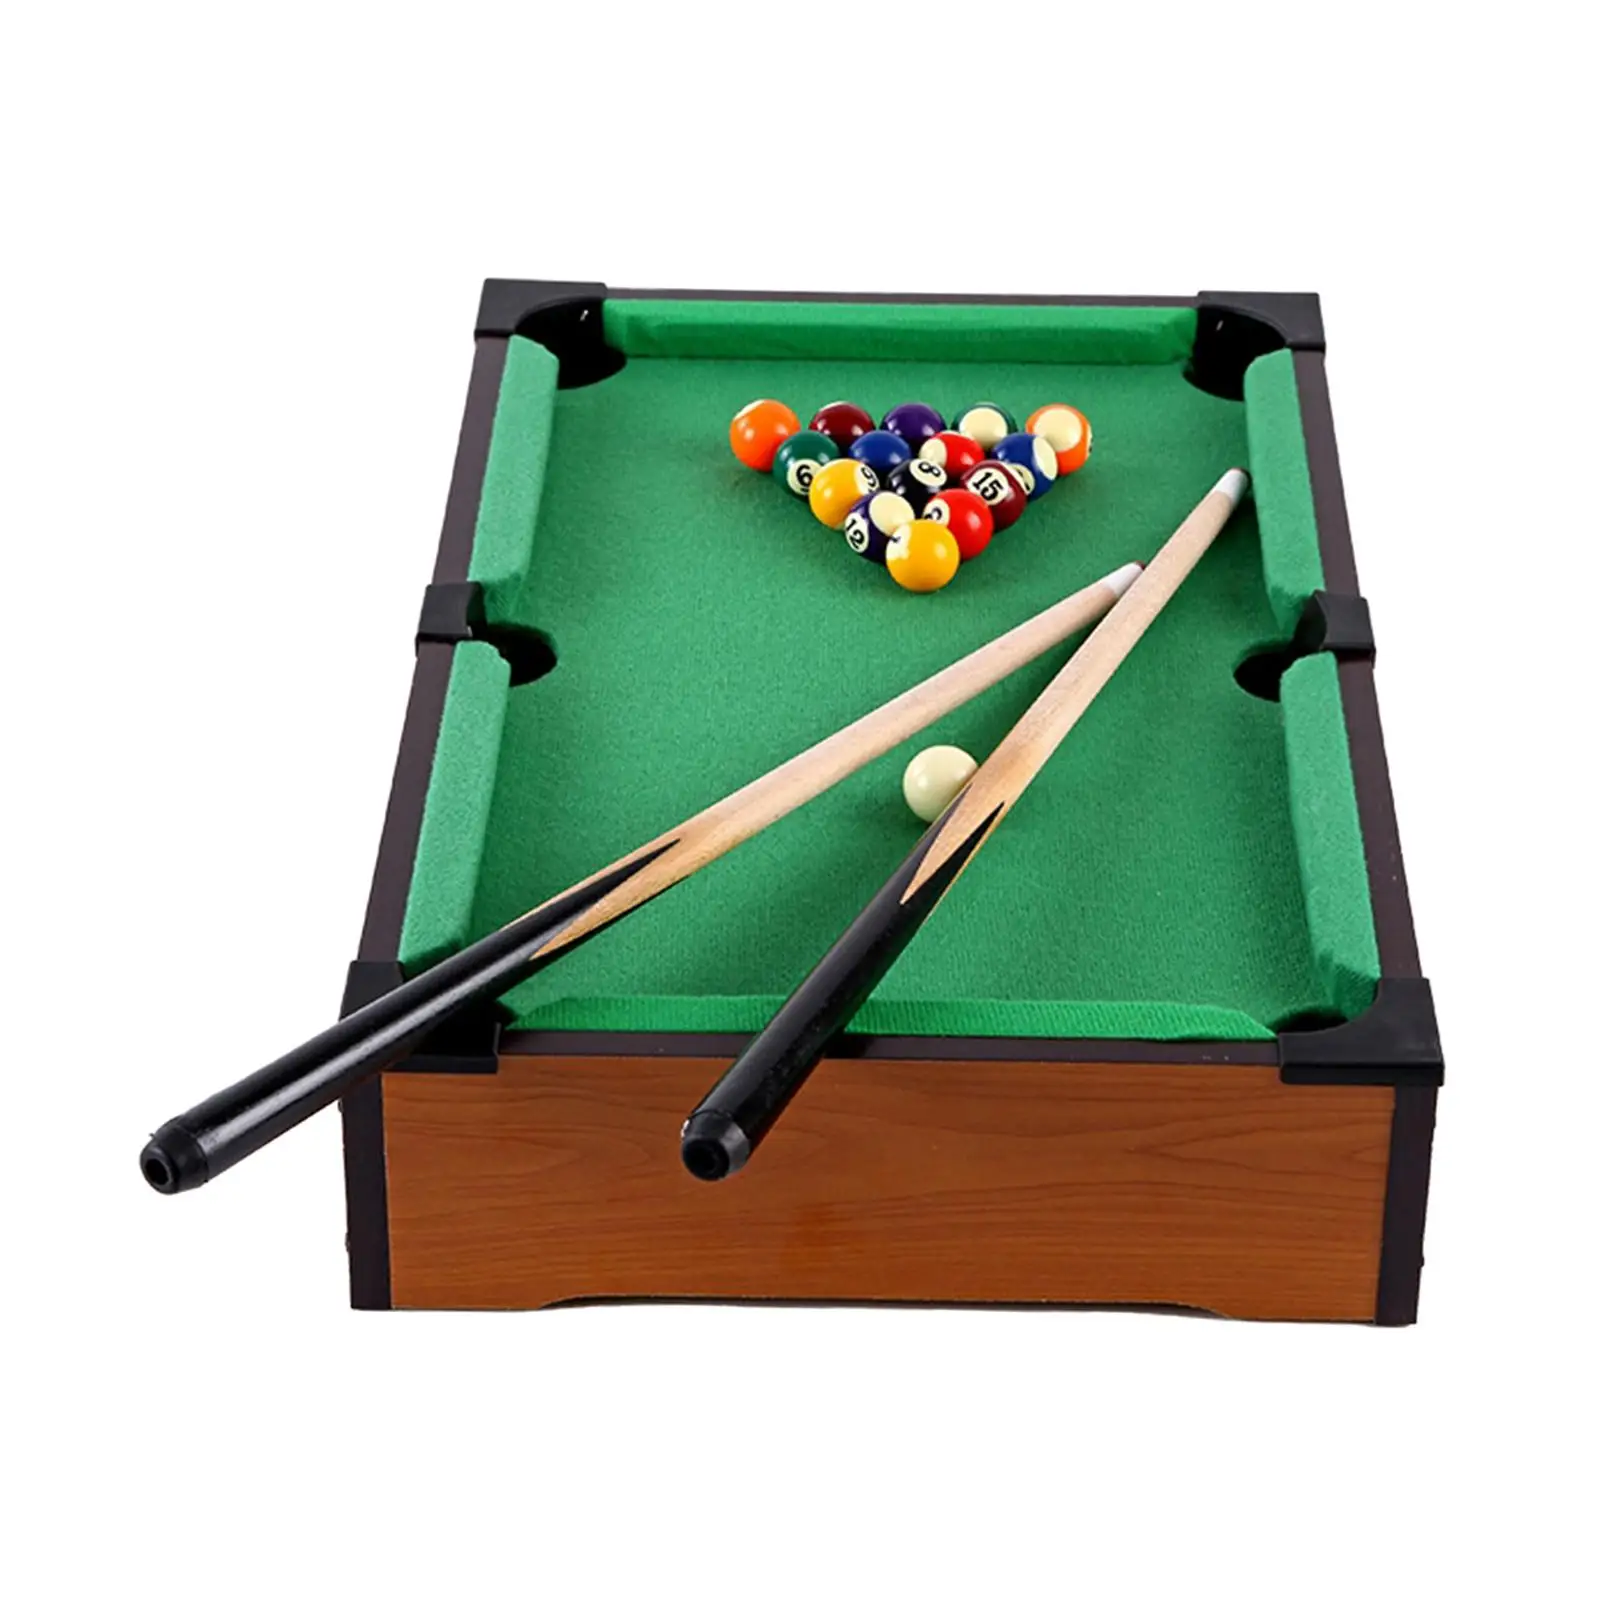 Mini Pool Table Game 20 inch with 16 Balls, 2 Pool Cues, Triangle Rack & Chalk Mini Billiards Set Great Gift for Boys and Girls